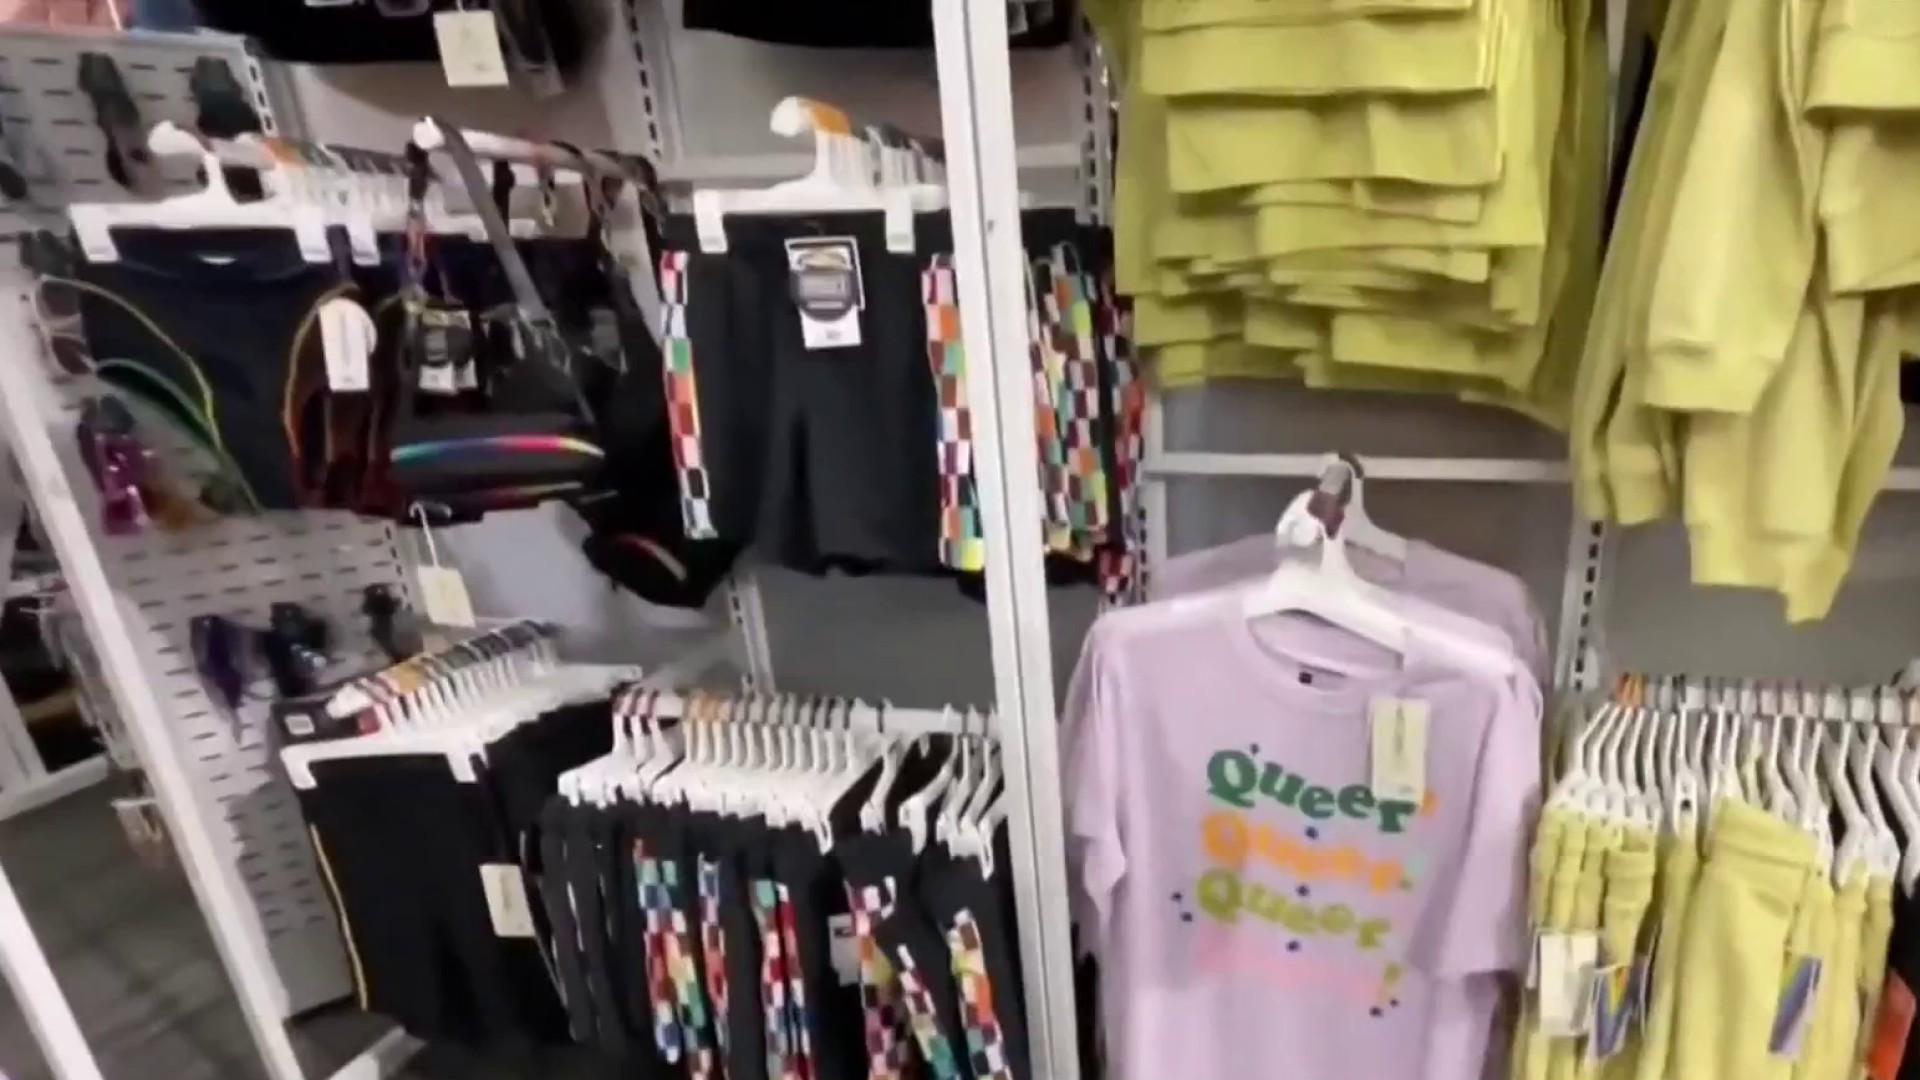 Target sees drop in sales after rightwing backlash to Pride merchandise, Business